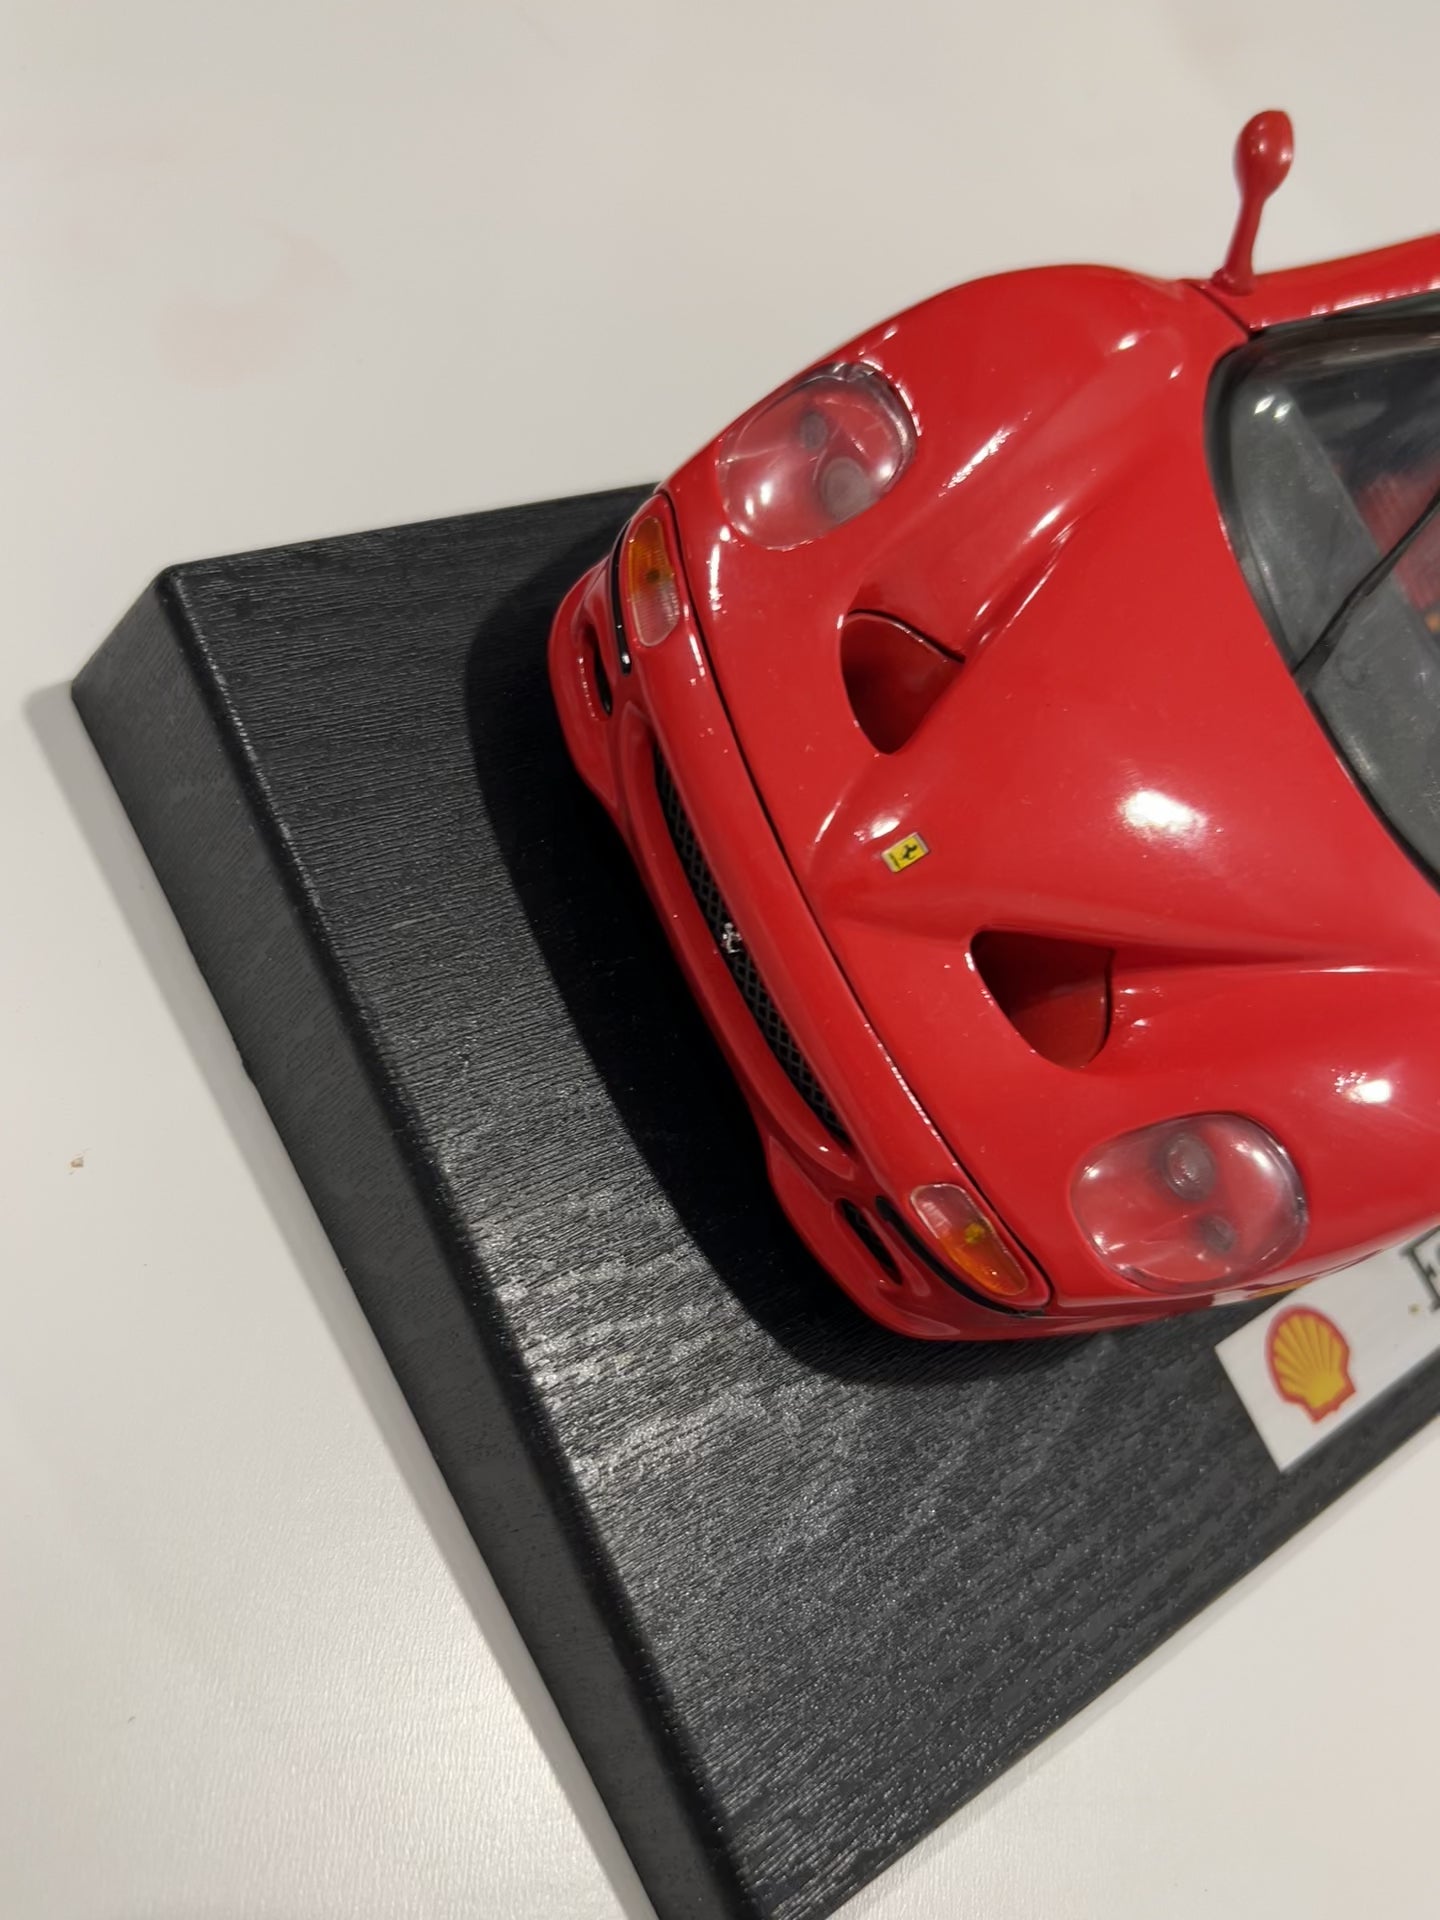 [Used][UNBOXED] 1:18 Scale Ferrari F50 1995 Red Maisto Made in Thailan ...